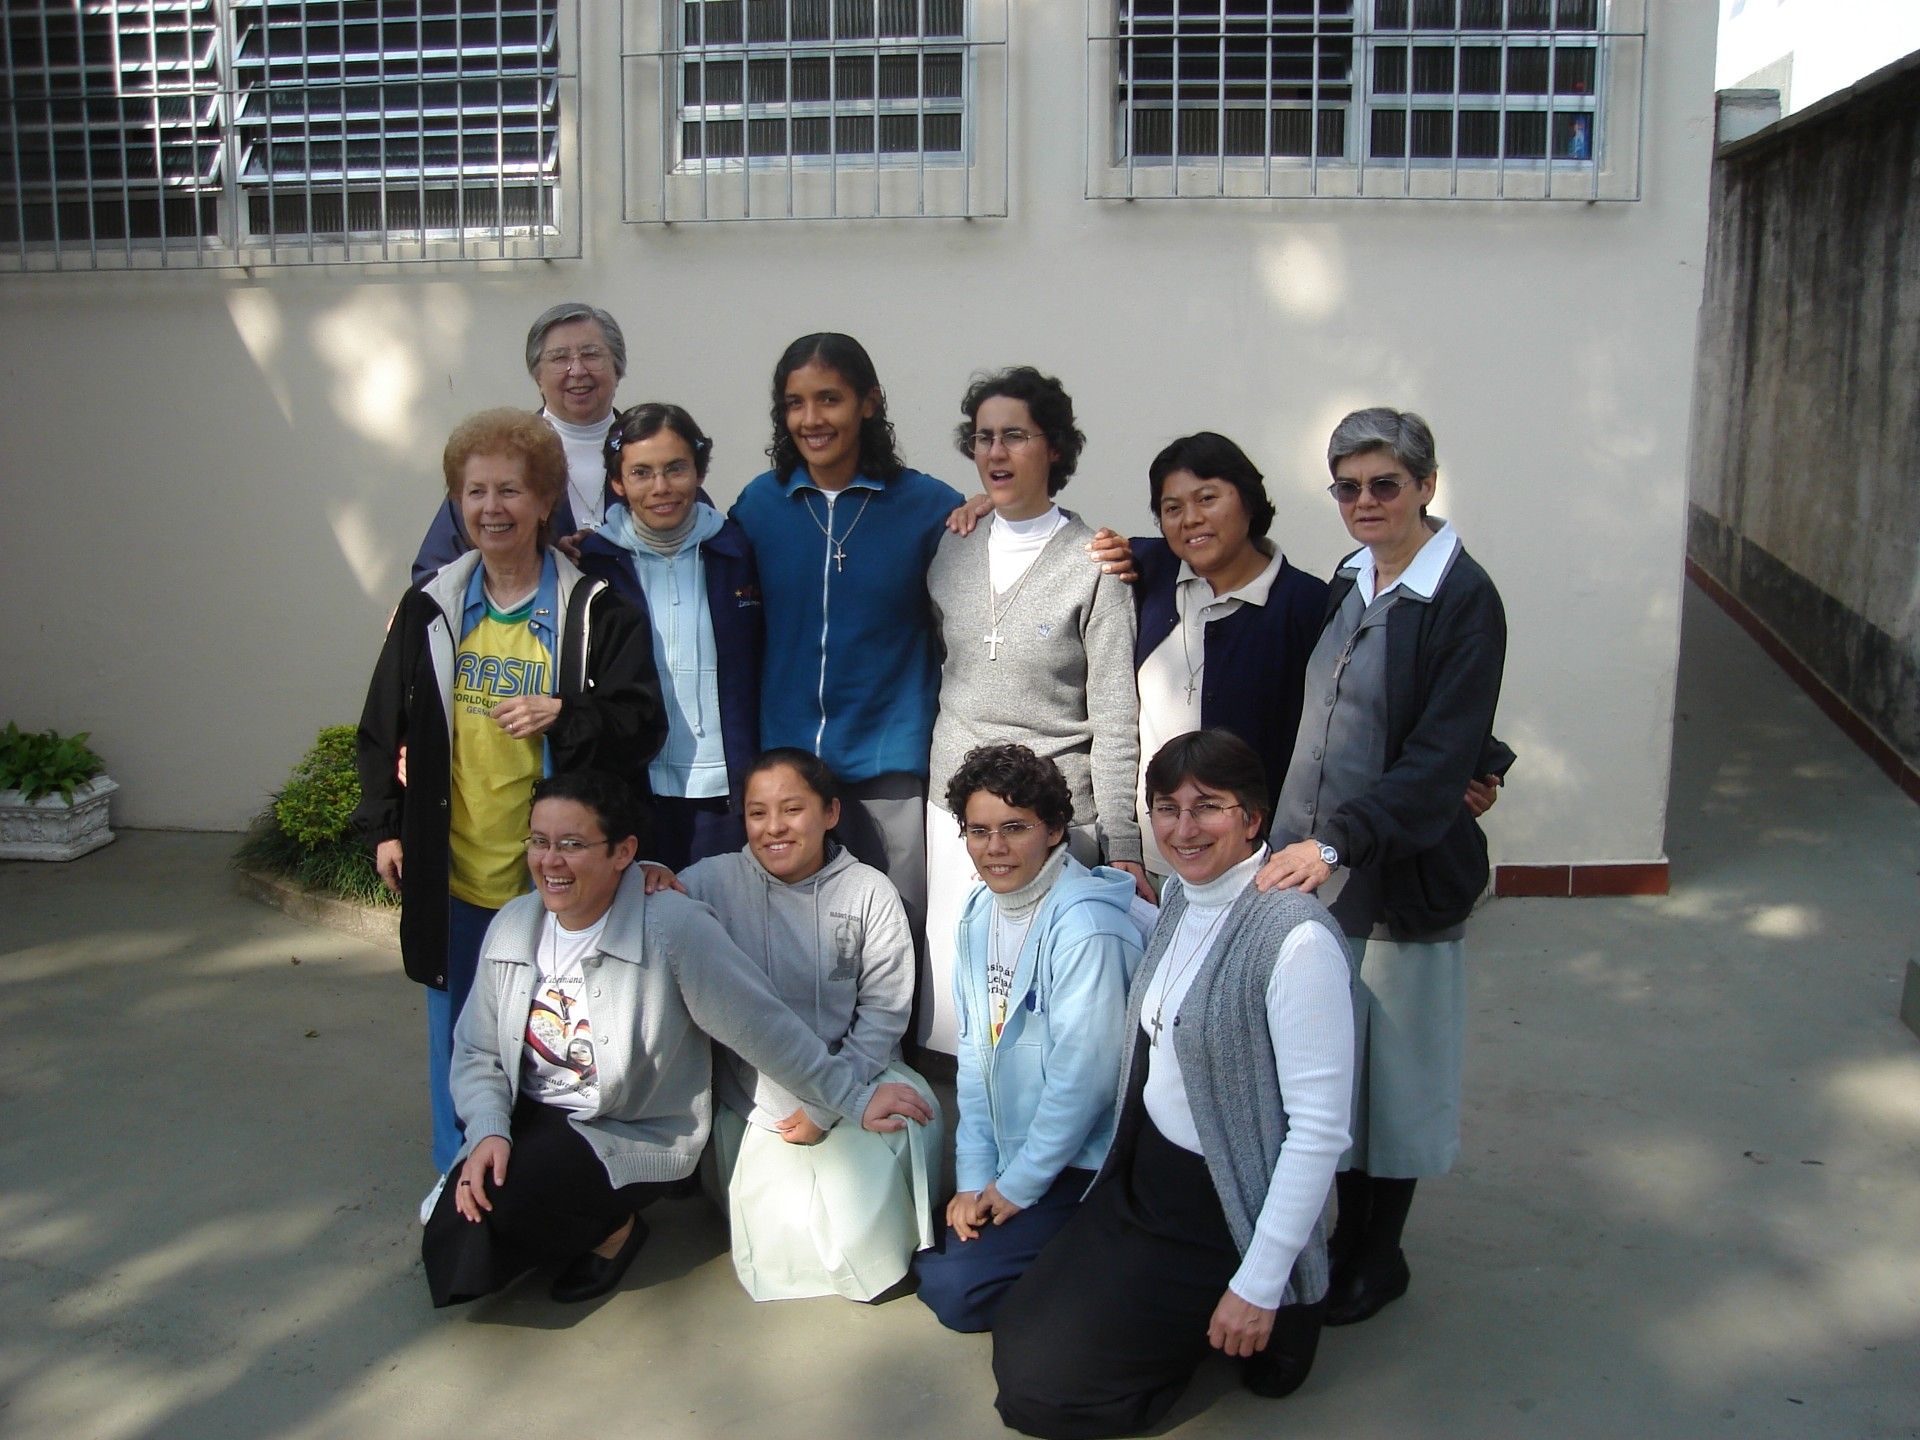 Missionary Sisters of the Sacred Heart of Jesus and a Cabrini professor in Brazil. Photo by Jerome Zurek.